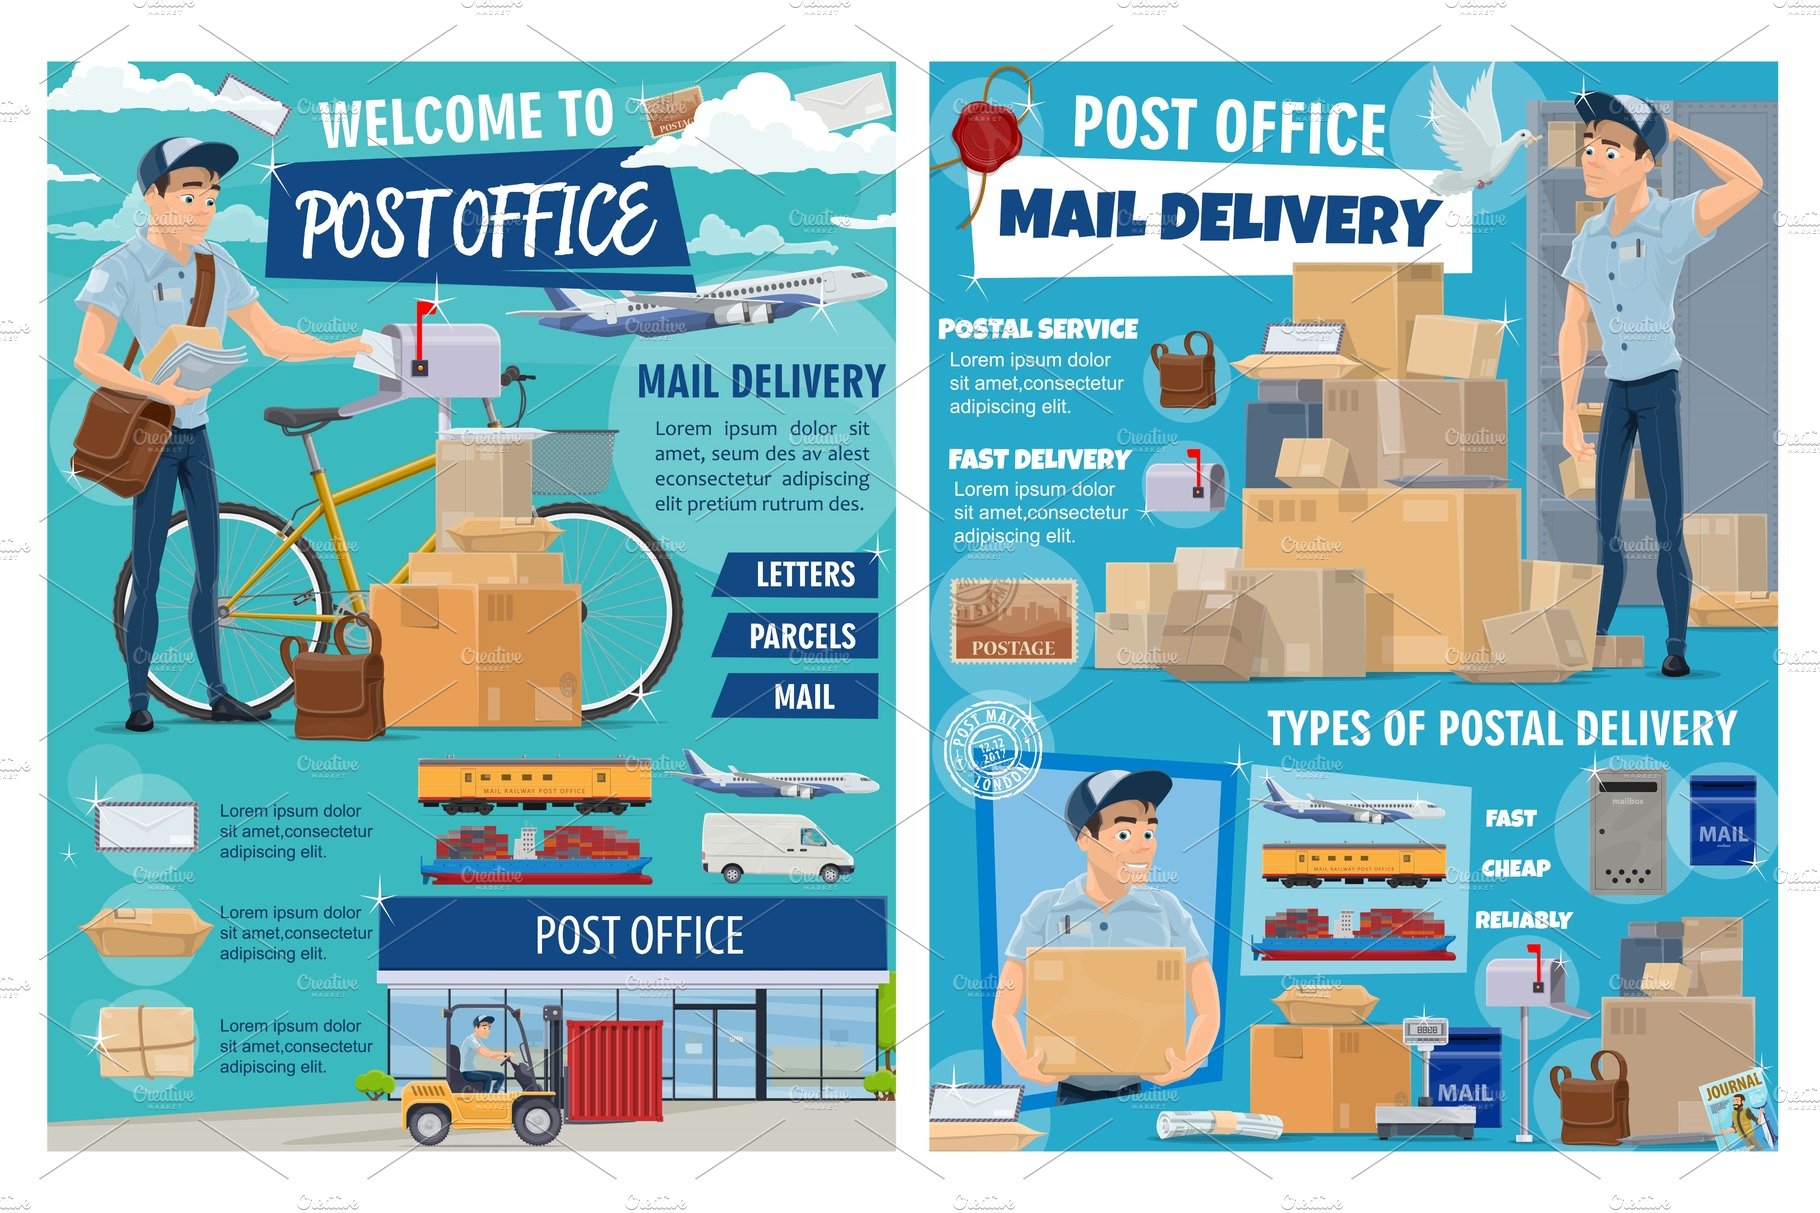 Mail and parcels, post office cover image.